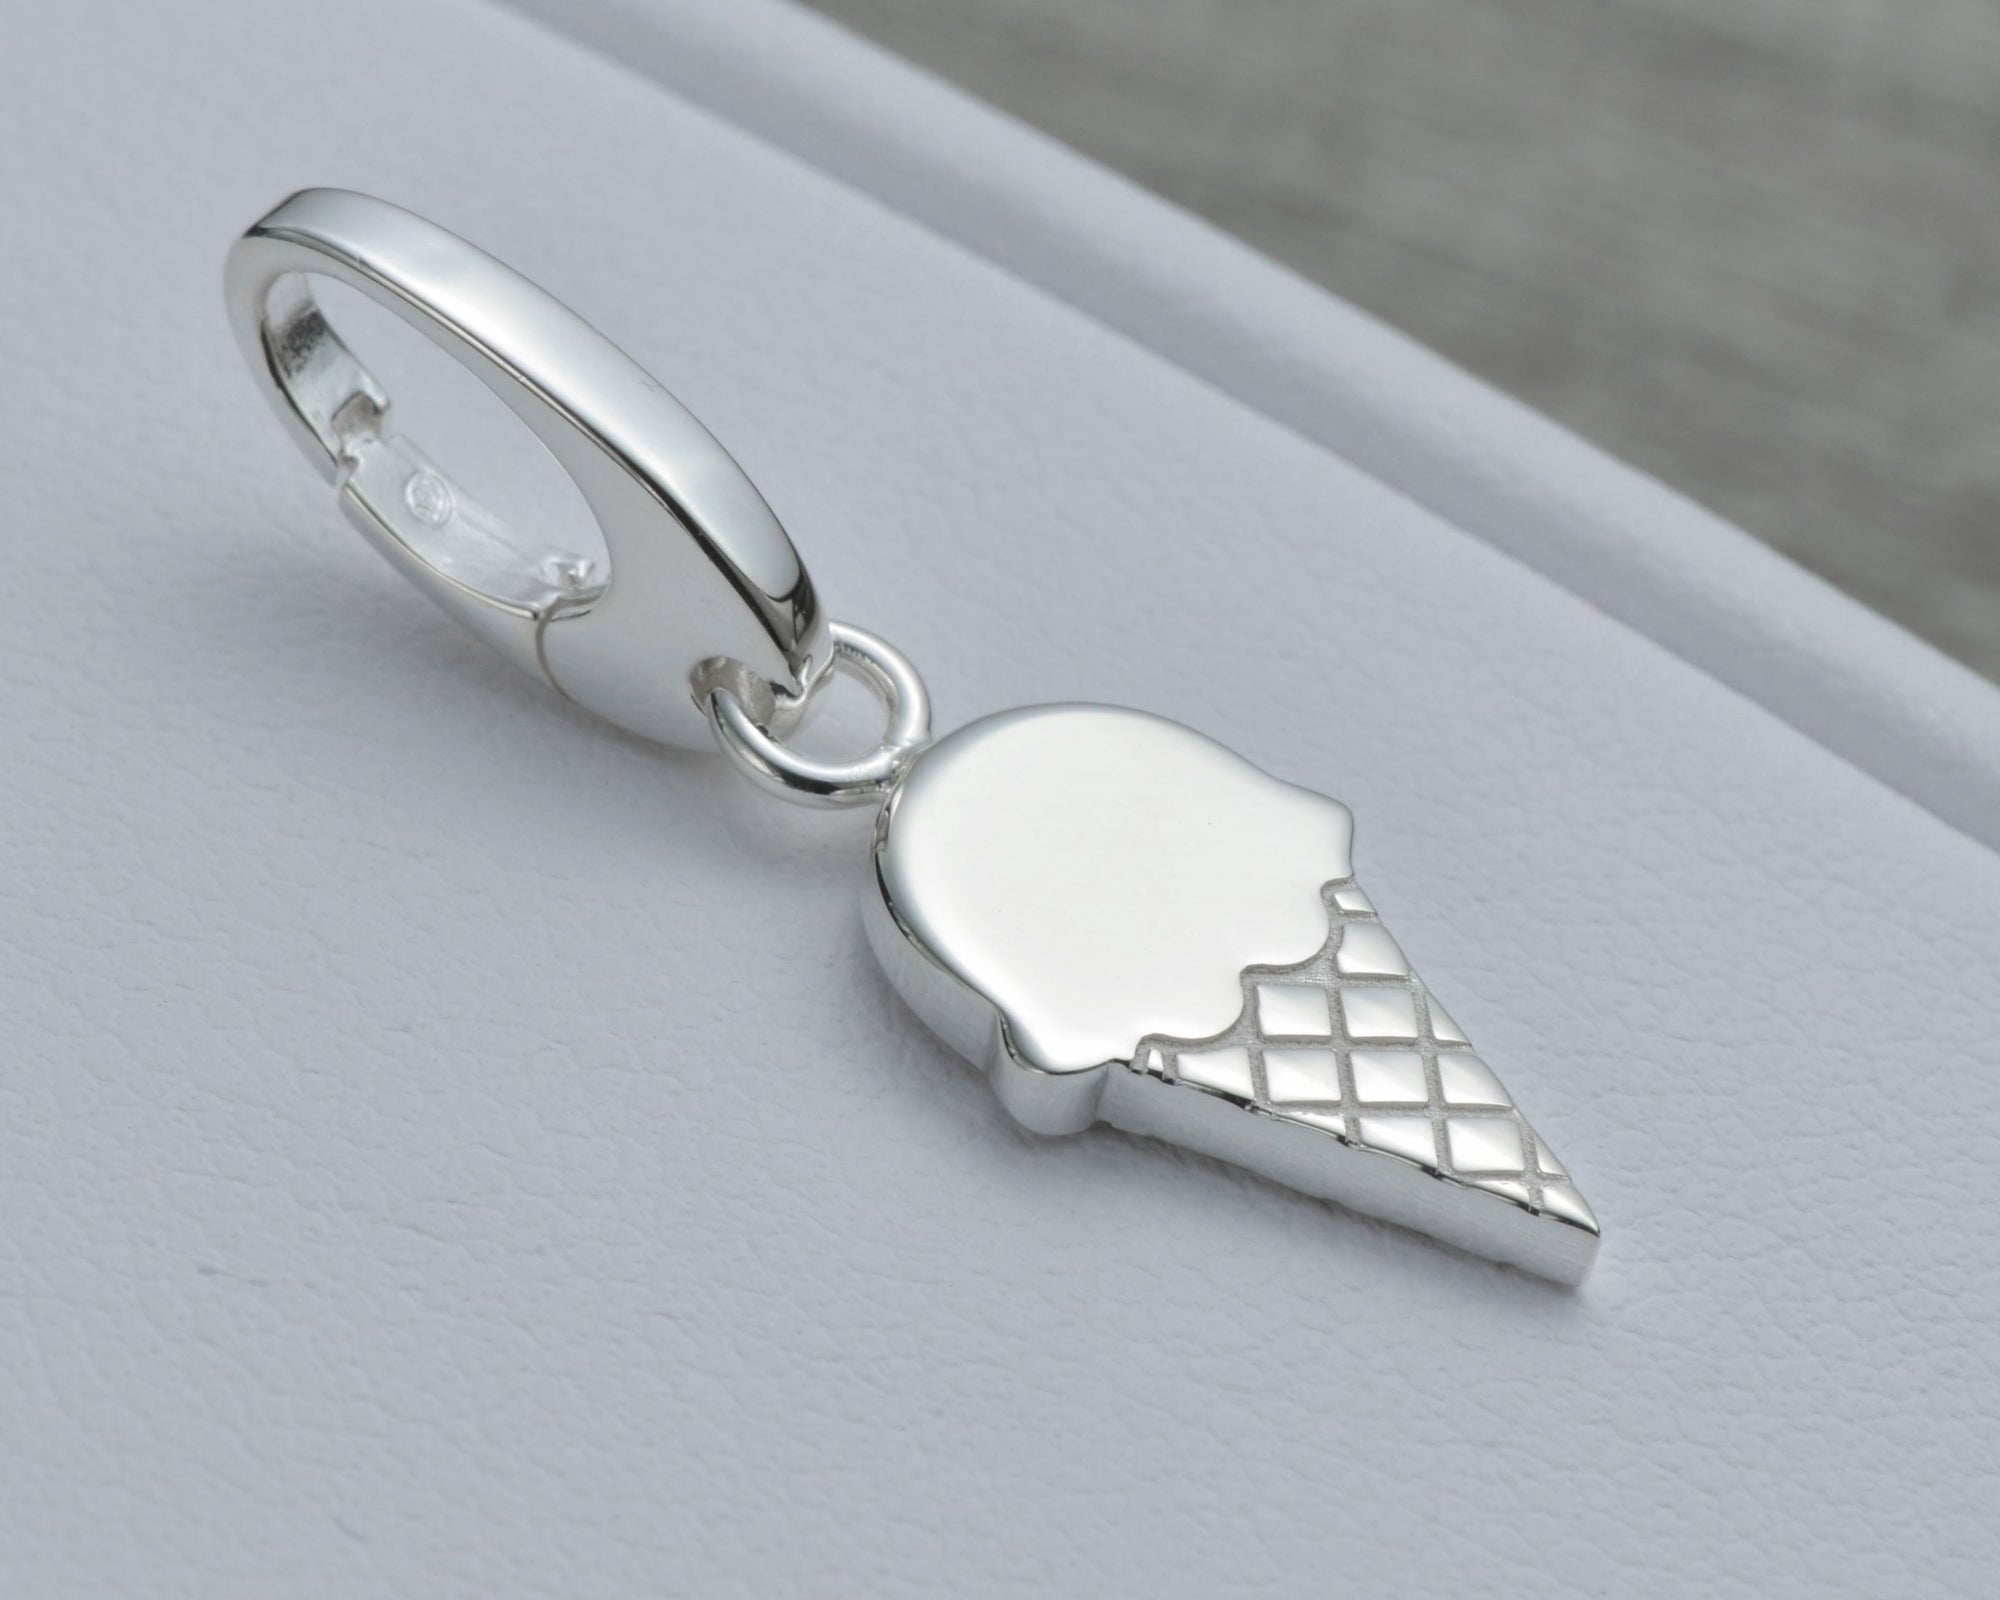 Ice Cream Cone Key Chain Charm in Sterling Silver – ChefJewelry